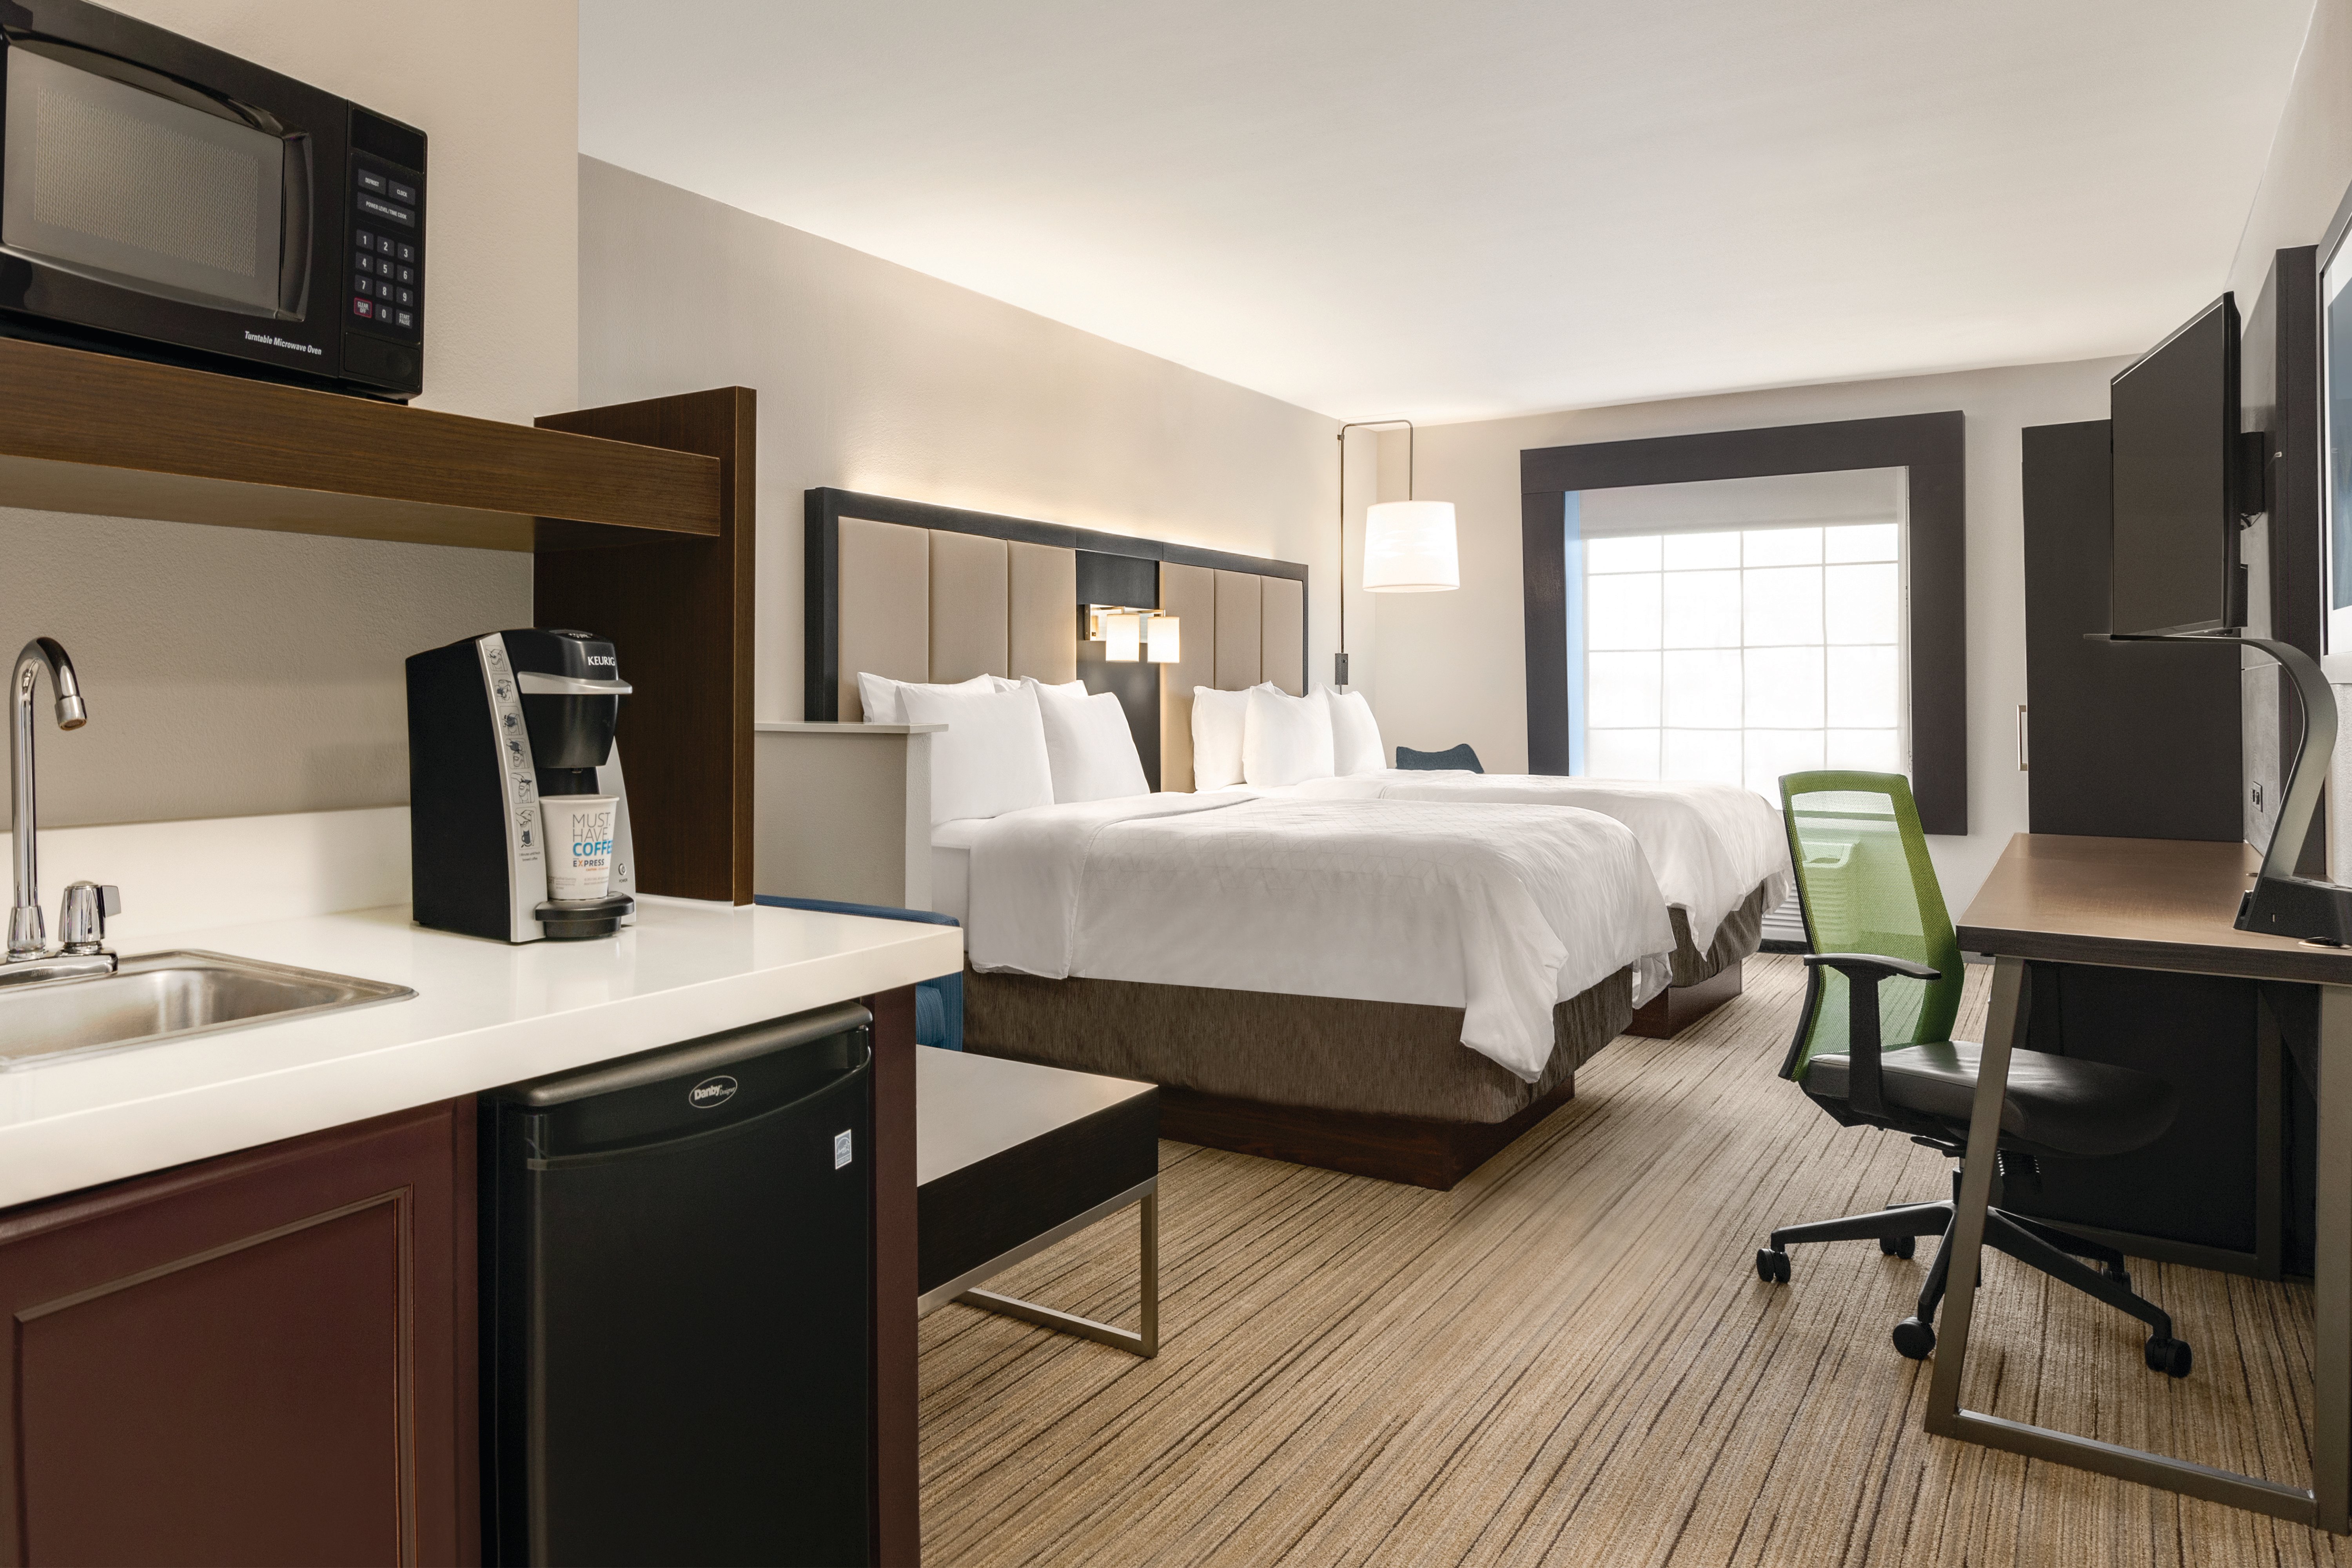 At the end of a long day, relax in our clean, fresh guest rooms